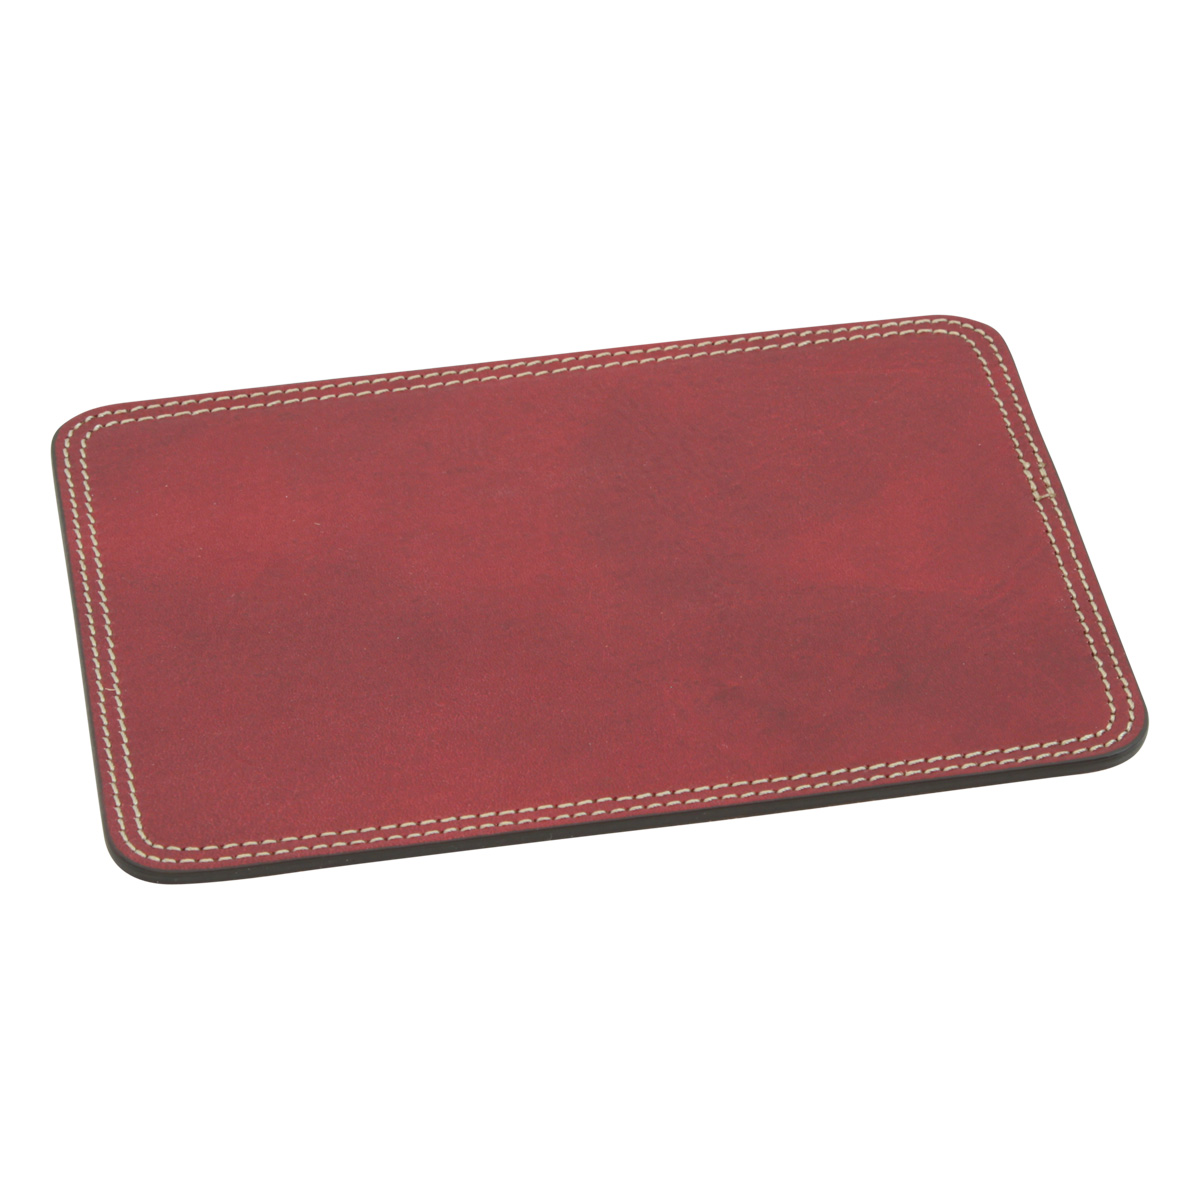 Leather mouse pad - red | 761089RO | EURO | Old Angler Firenze